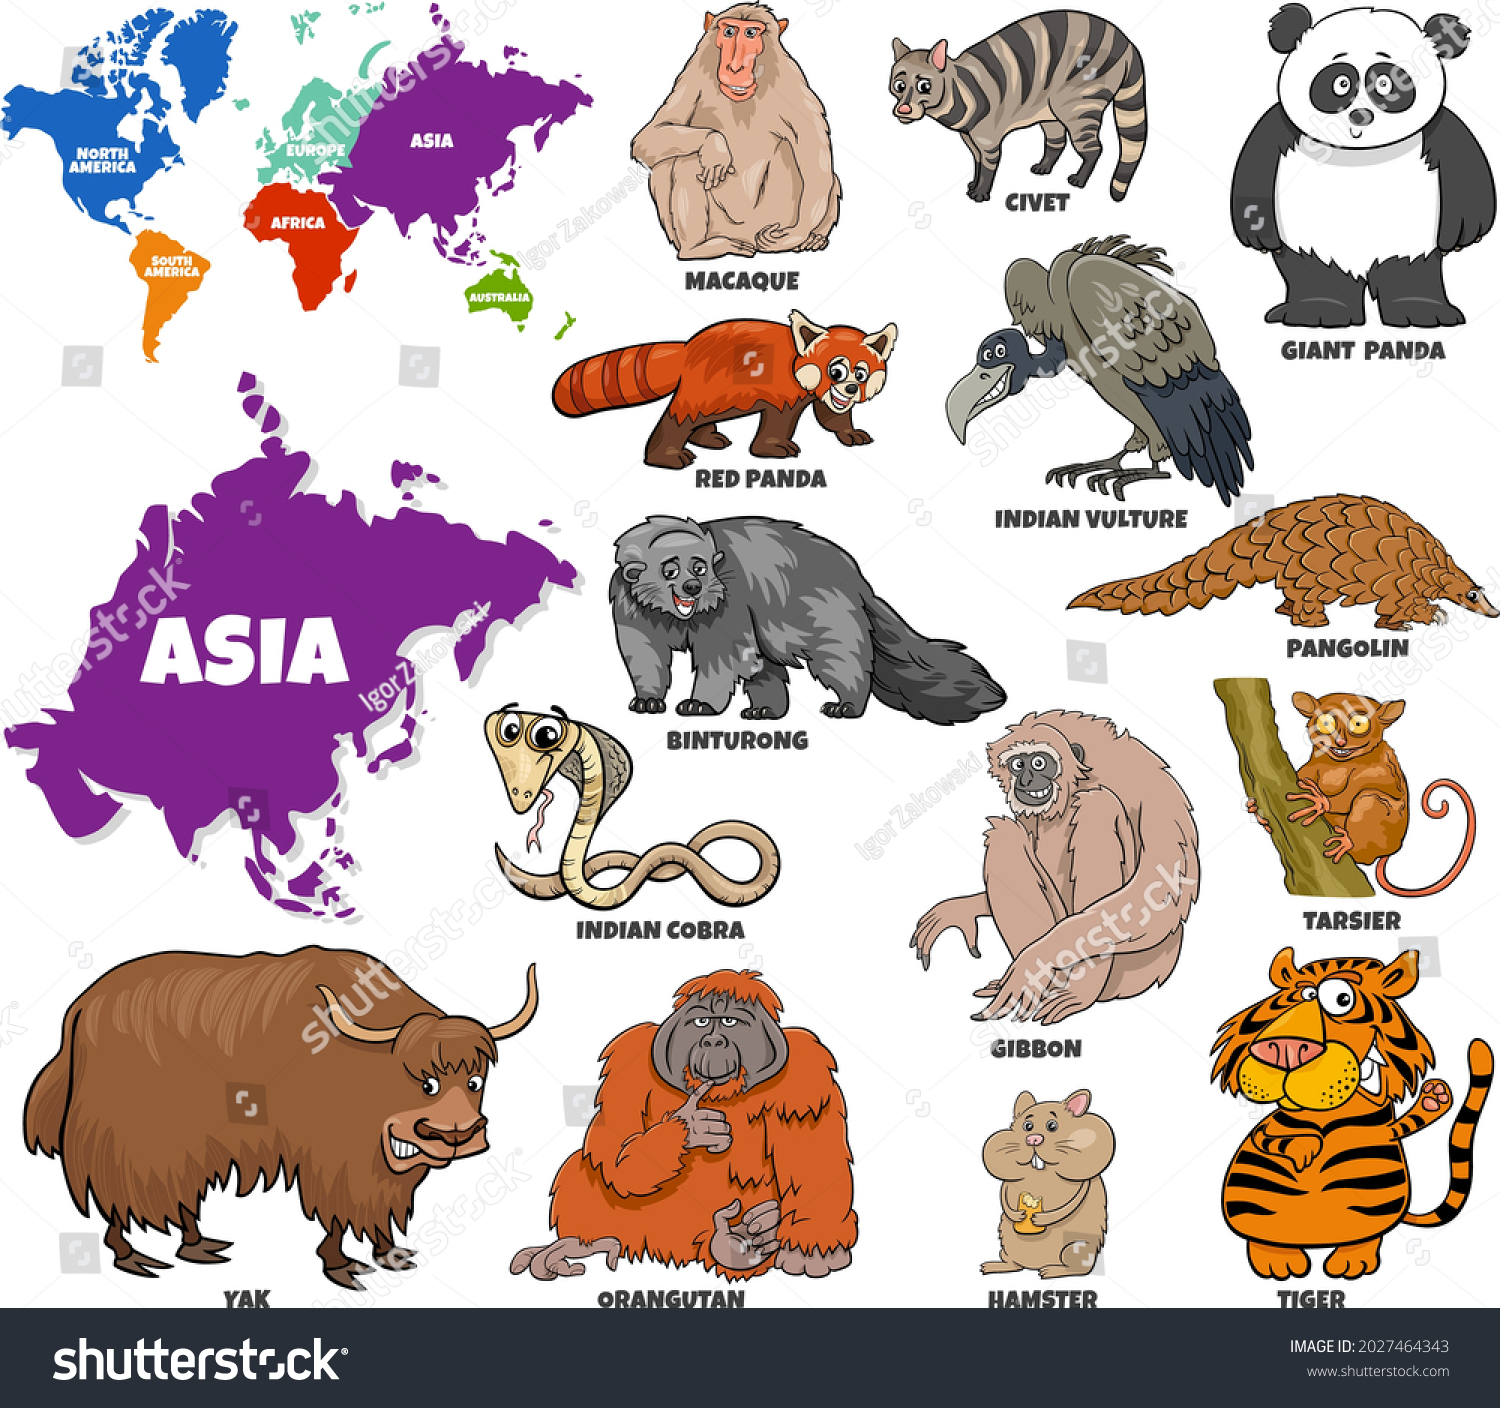 SVG of Educational cartoon illustration of Asian animal species set and world map with continents shapes svg